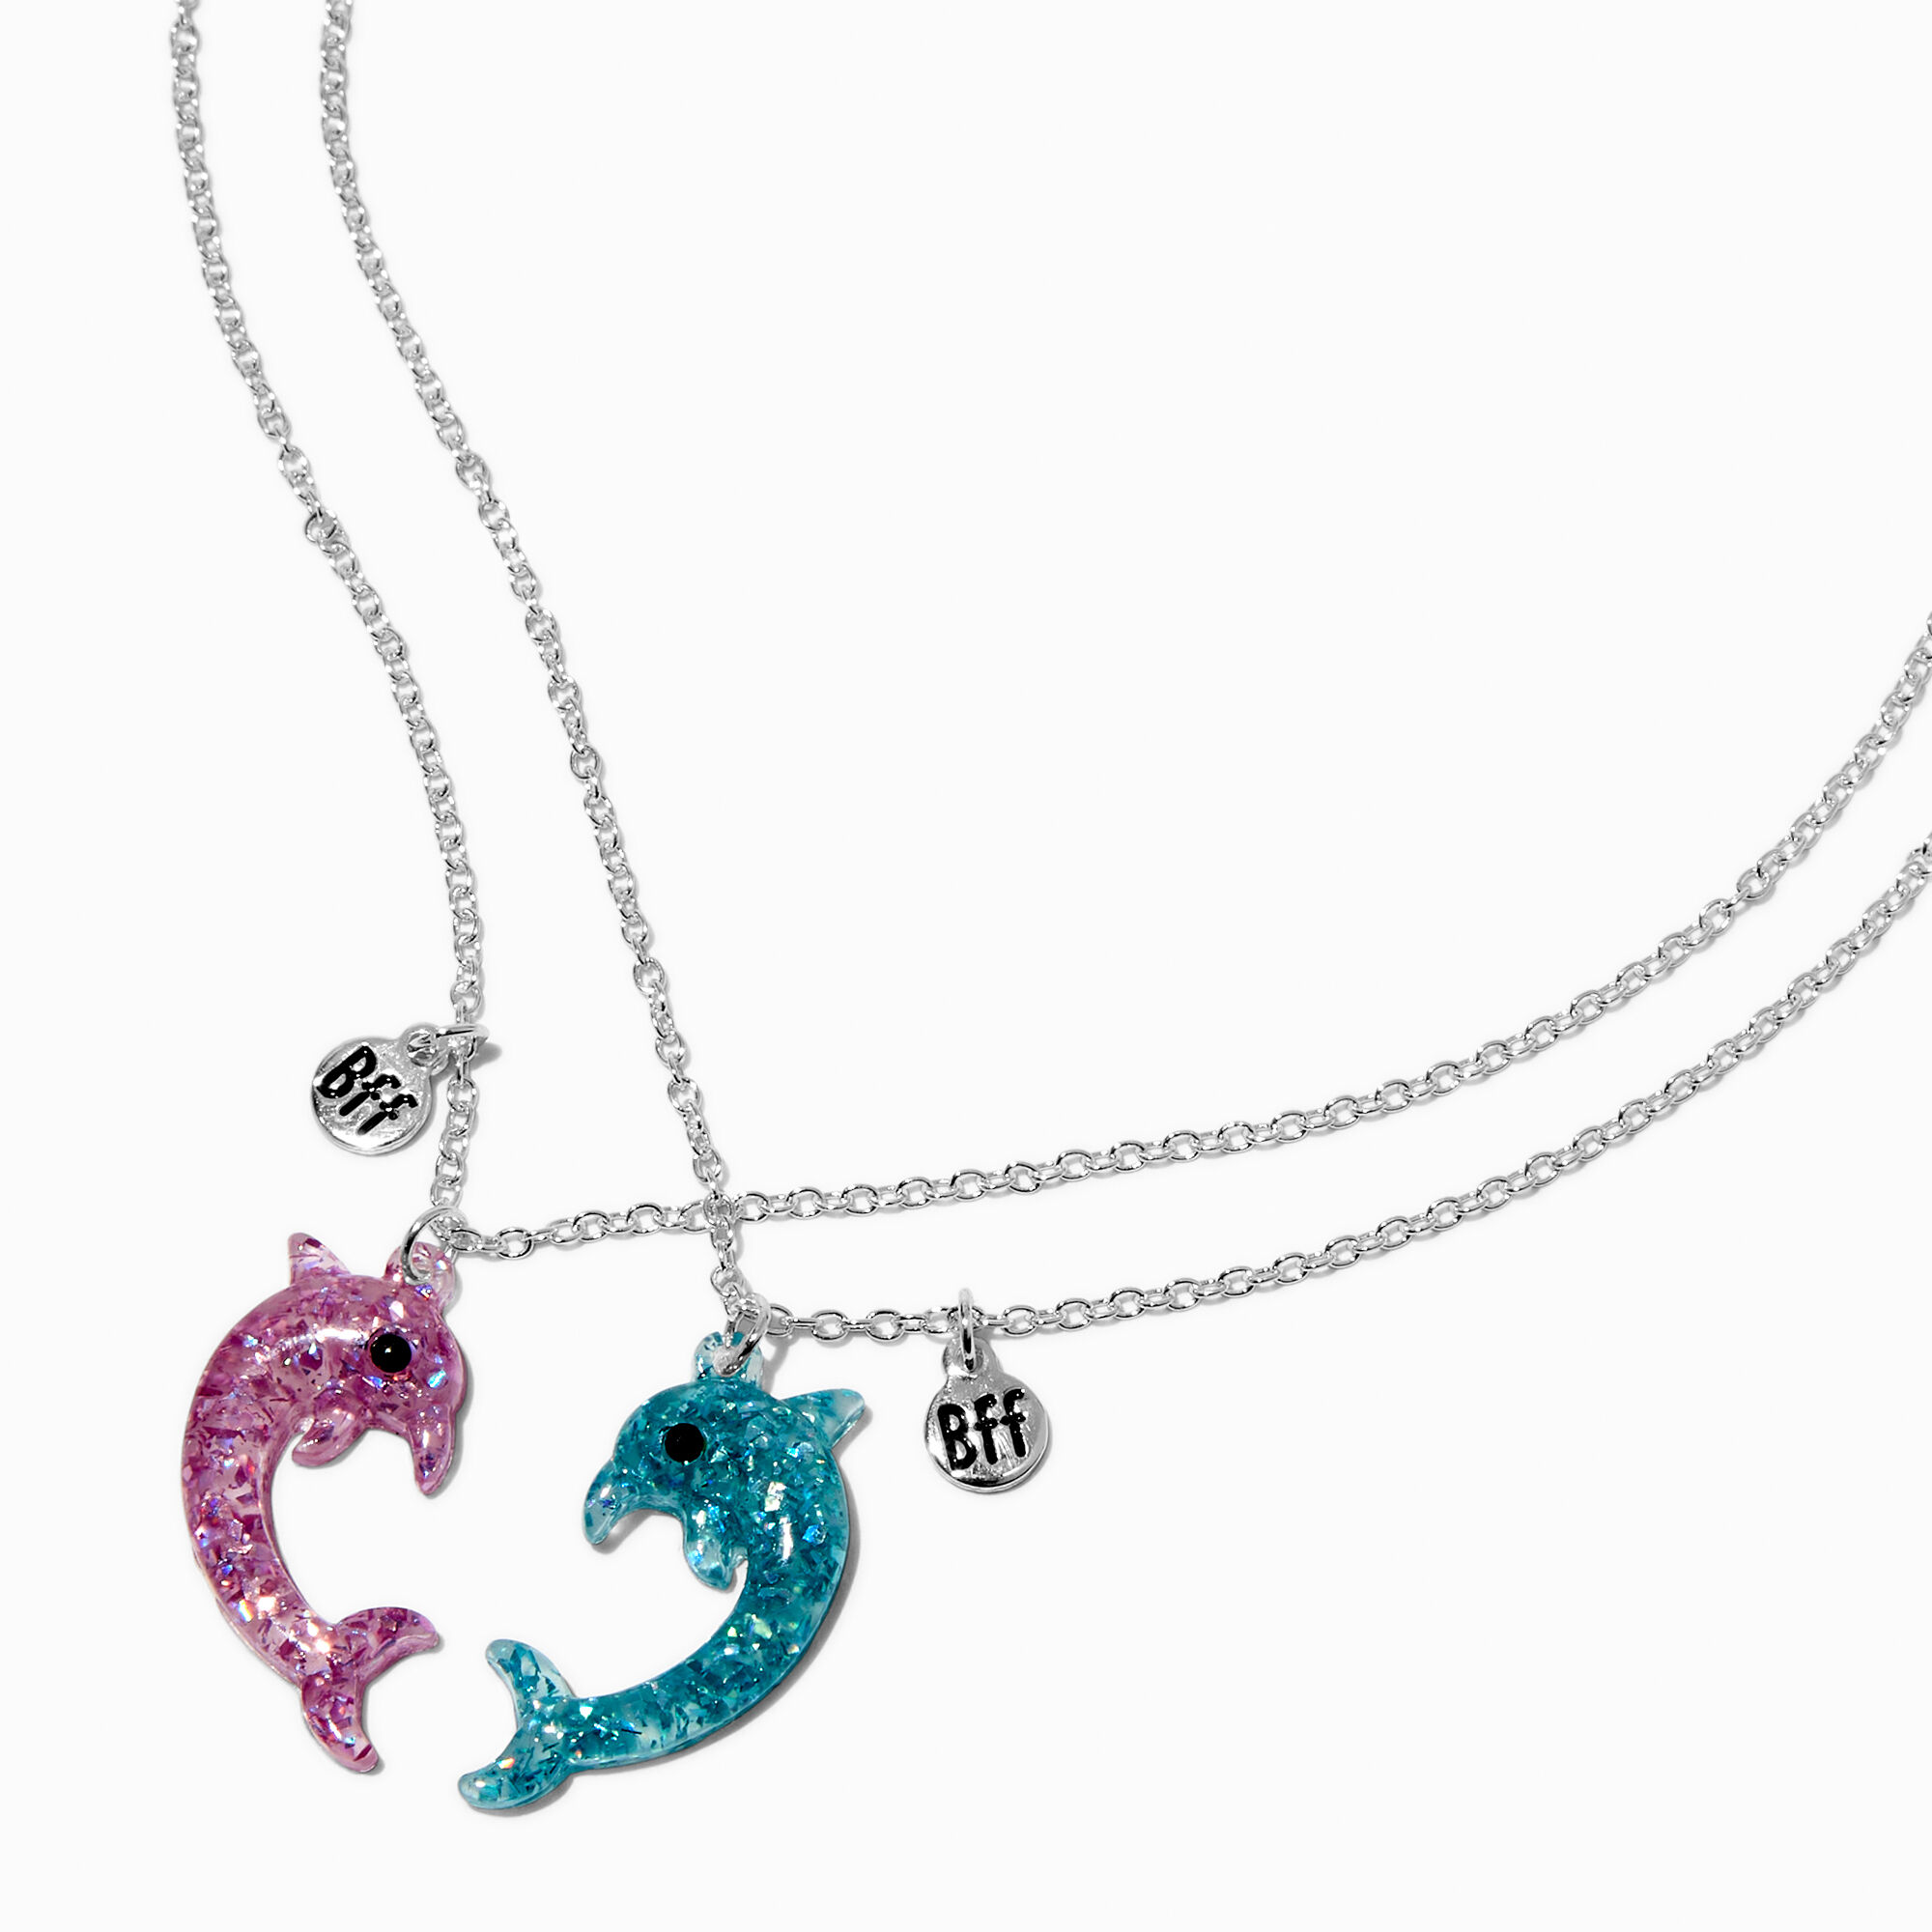 View Claires Best Friends Glittery Dolphin Pendant Necklaces 2 Pack Silver information